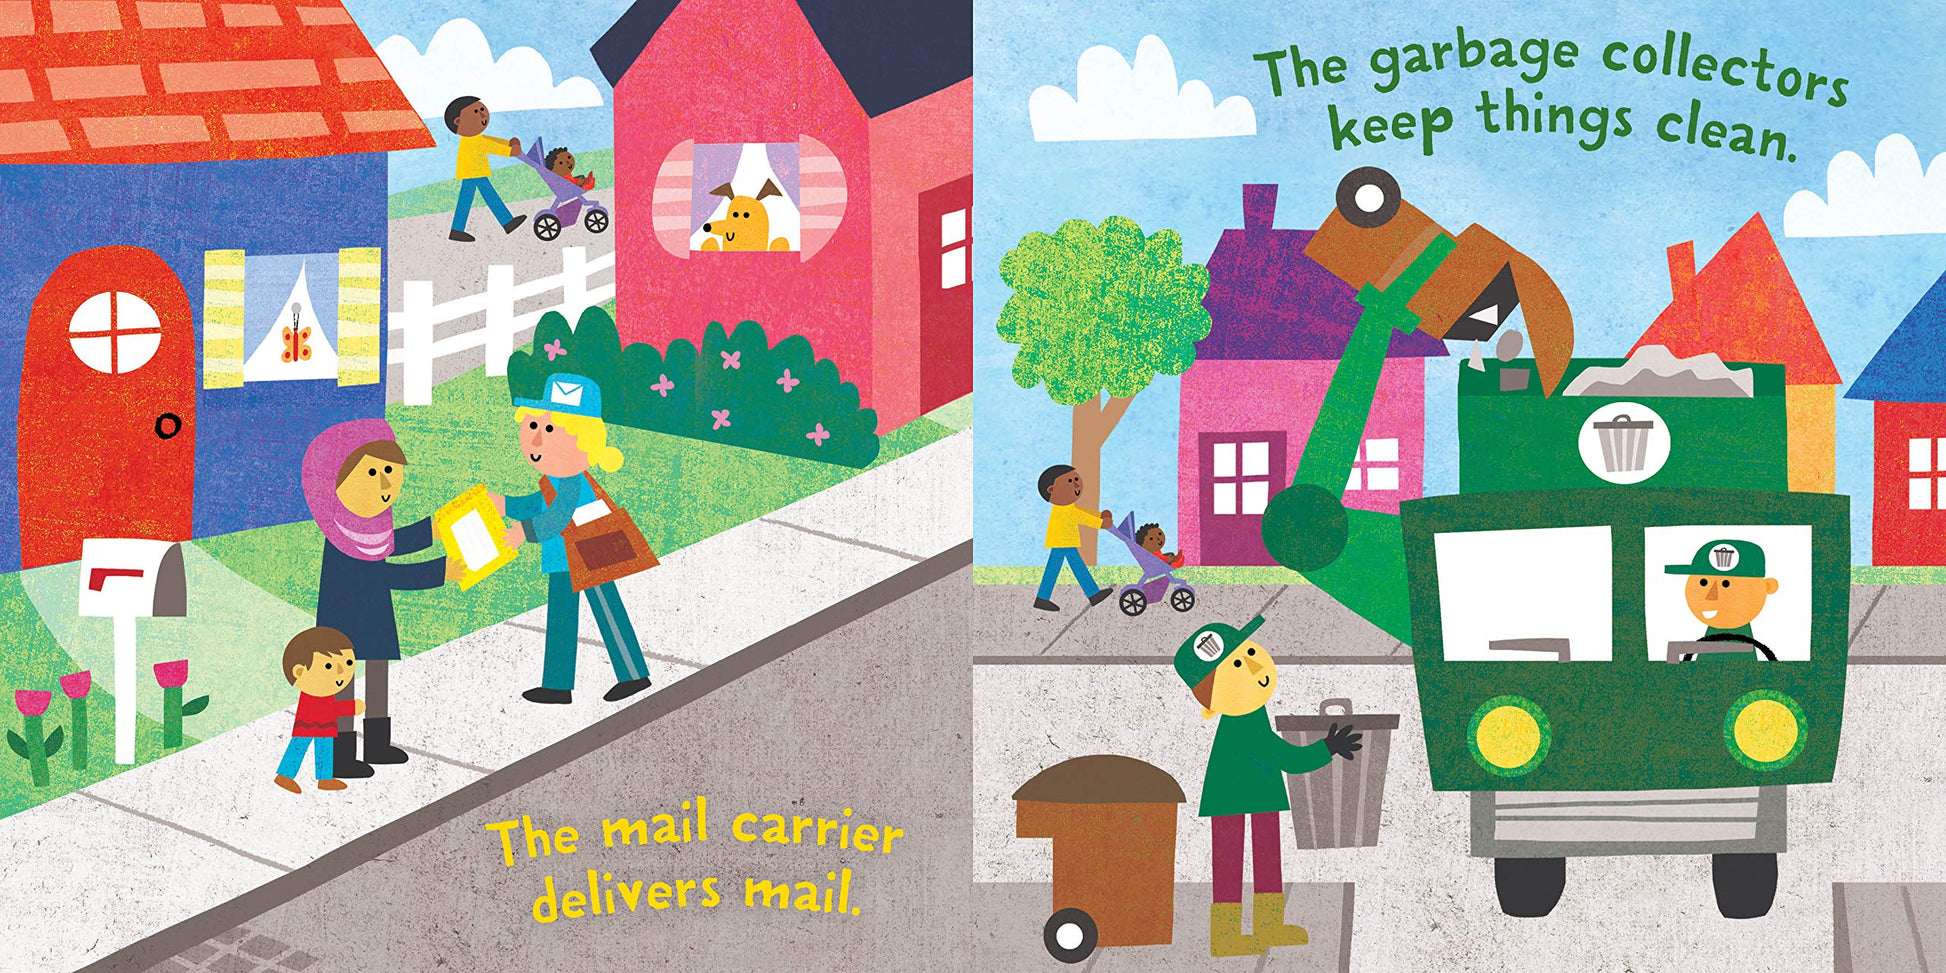 two pages inside the book with illustrations of a mail woman handing someone their mail in front of their house, and the other page with a trash truck emptying a trash can. and text